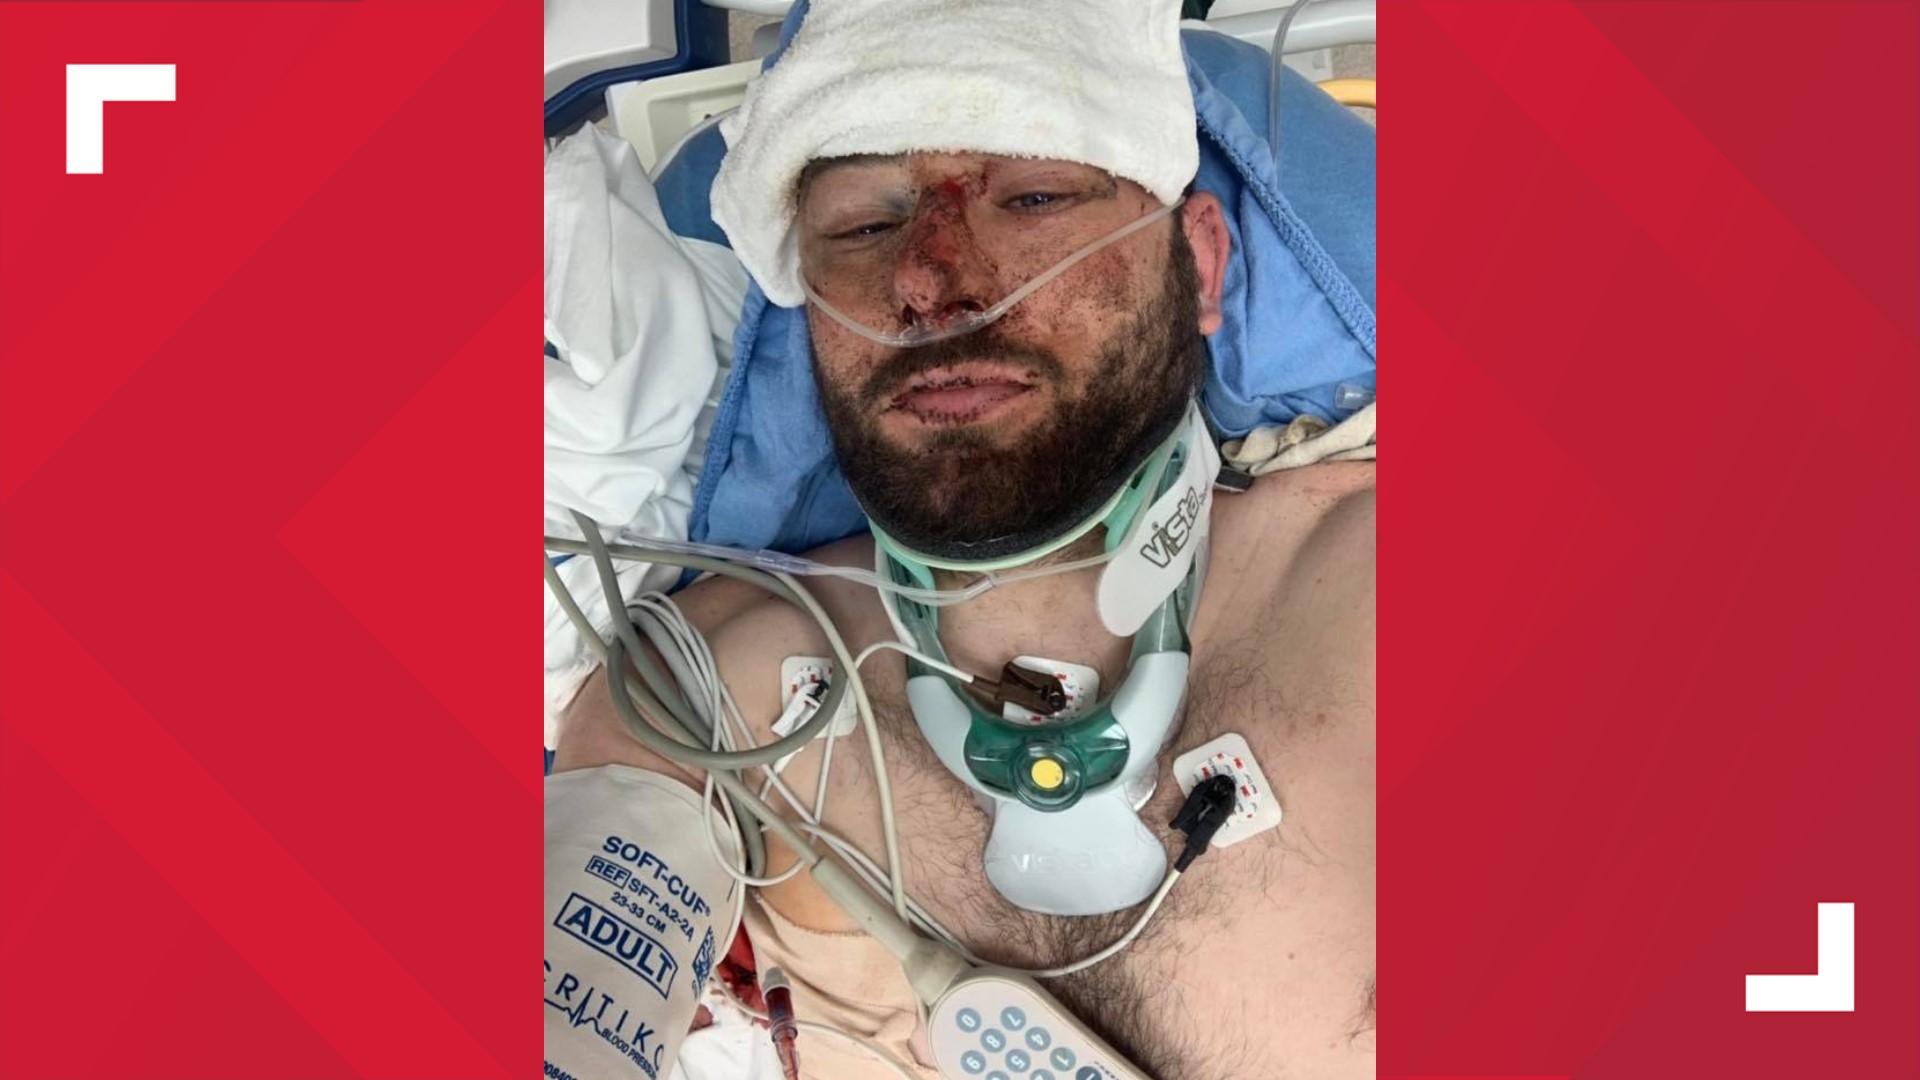 A Scottish cyclist said he was attempting to ride his bike around the world when he was hit by a car near Temple on Saturday night. He said he is lucky to be alive.